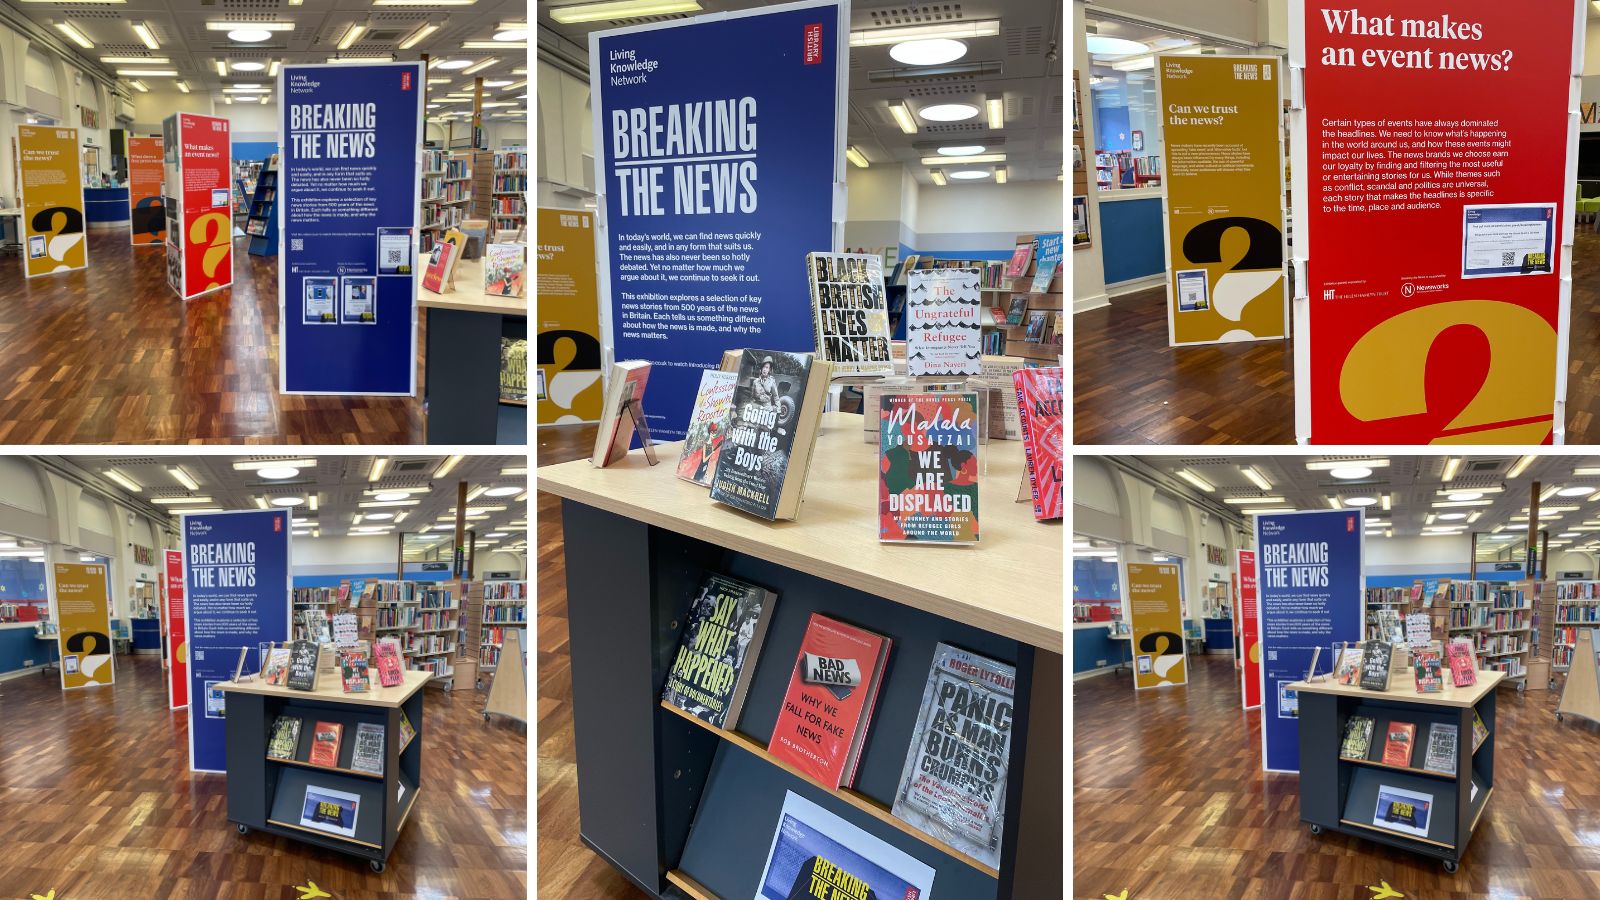 Breaking the News Exhibition at Nuneaton Library.